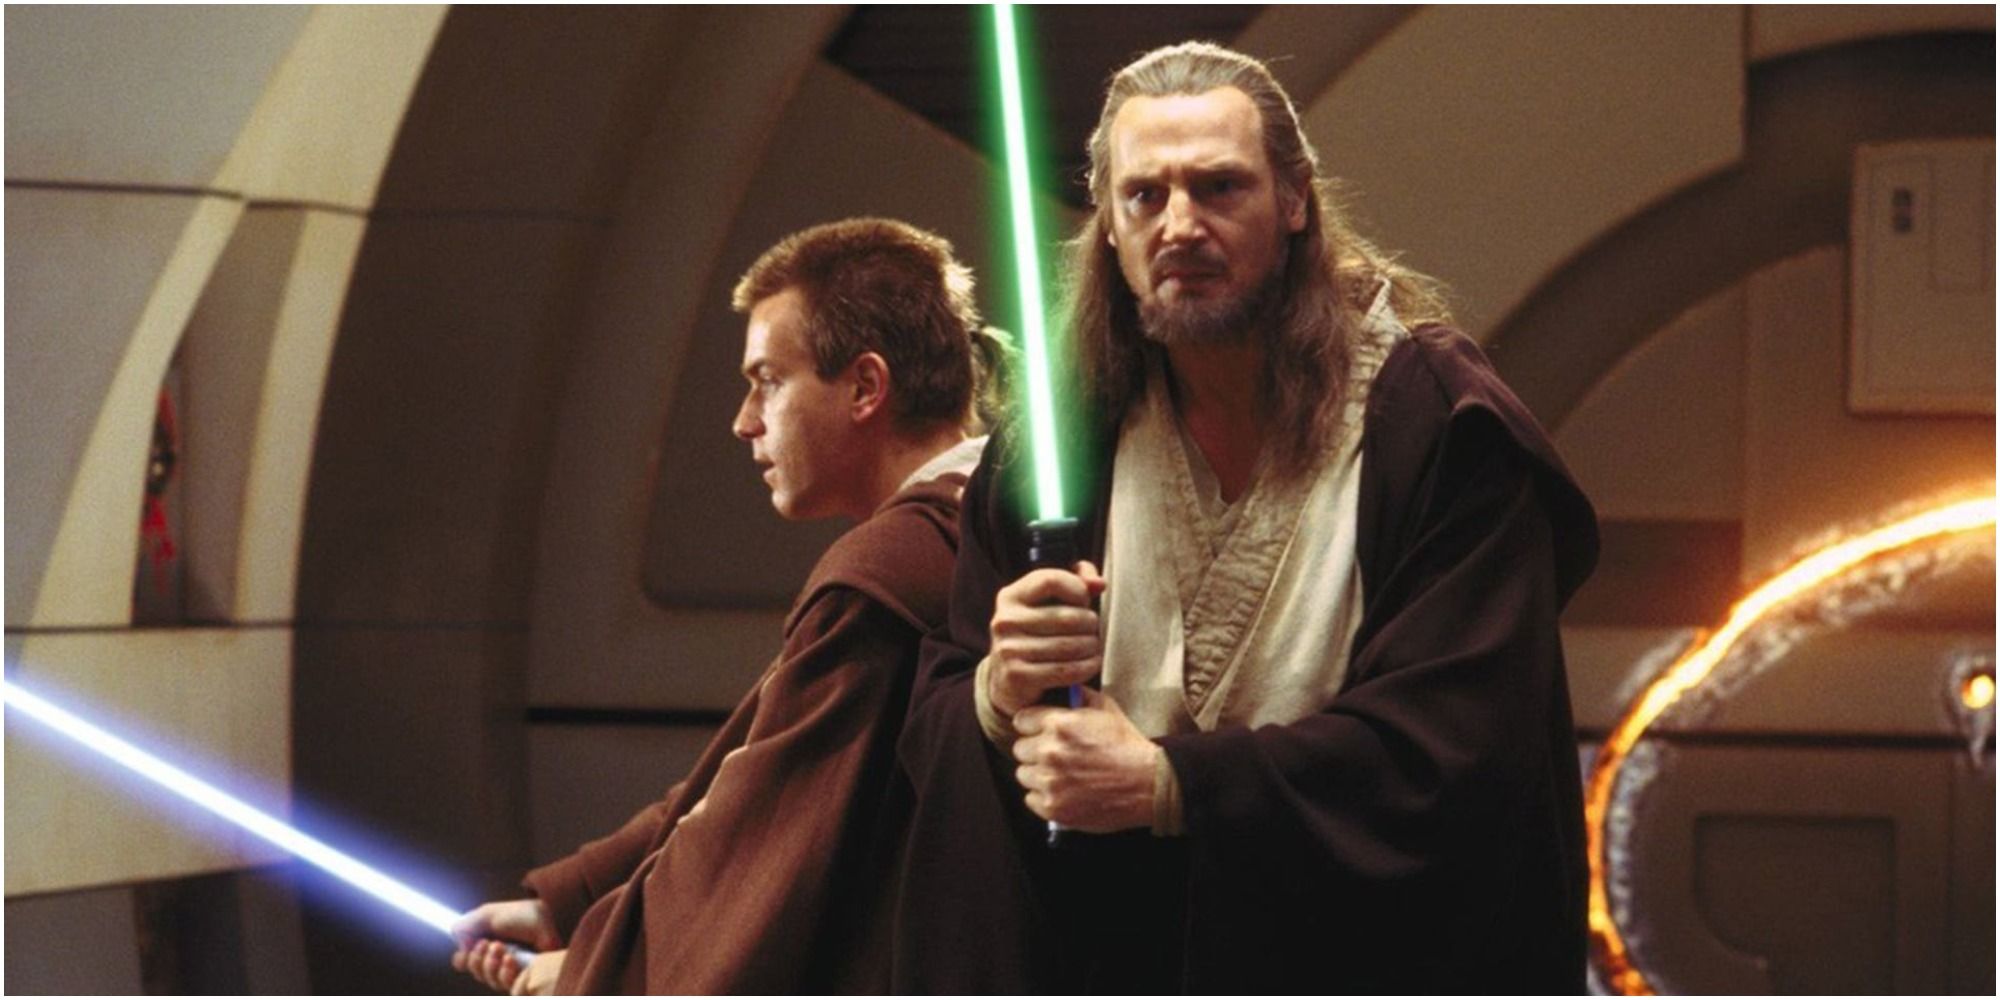 Obi Wan and Qui-Gon with lightsabers